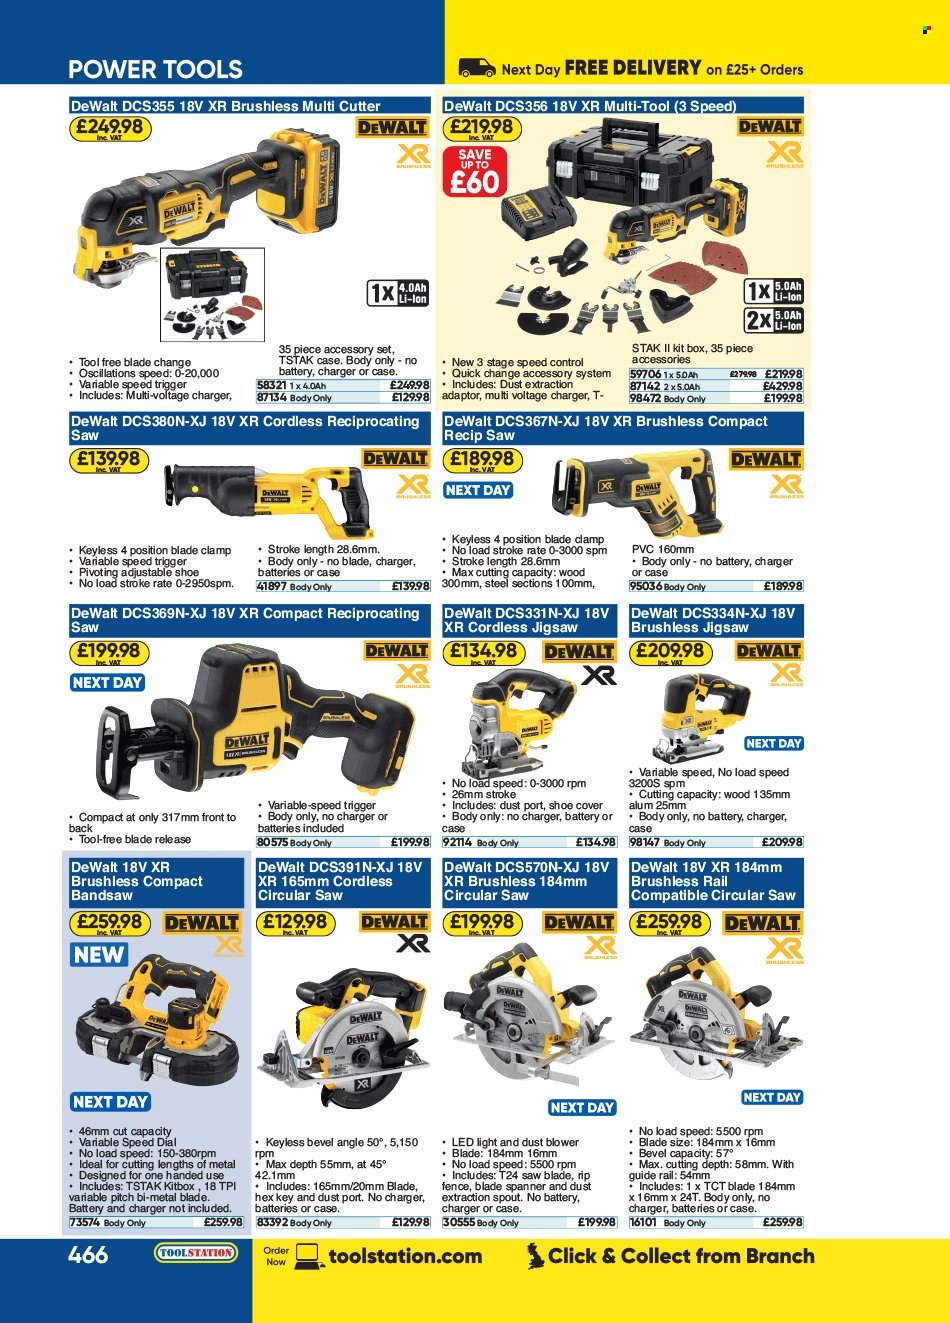 Toolstation offer . Page 466.